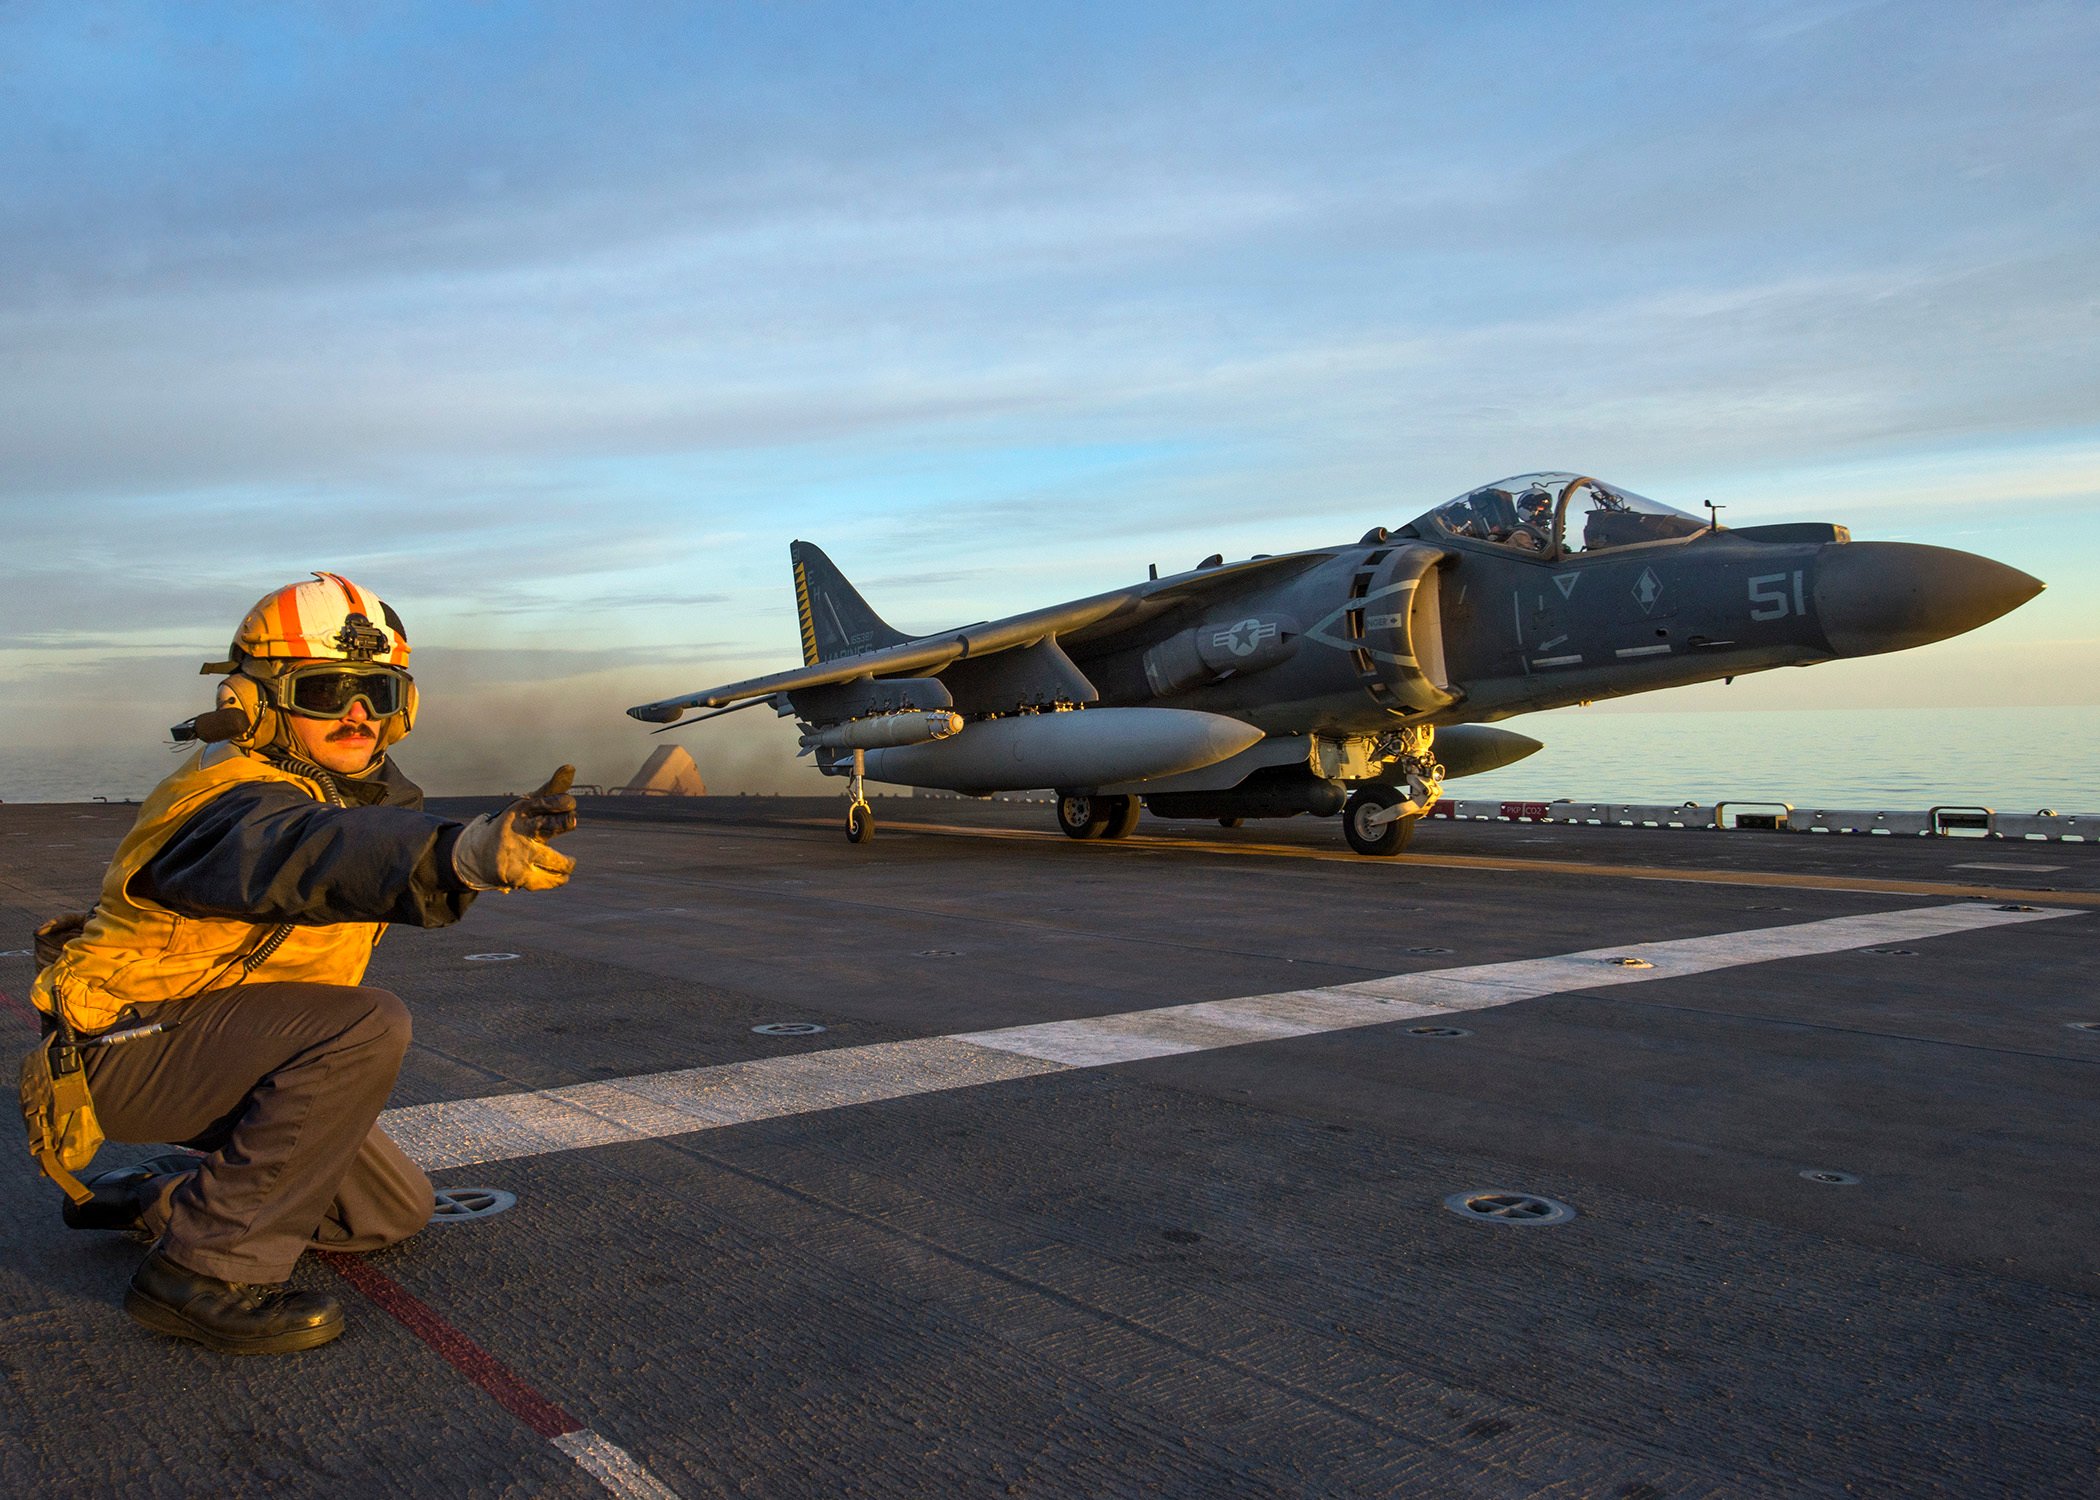 An AV-8B Harrier, from the 22nd Marine Expeditionary Unit (MEU), takes off from the amphibious assault ship USS Wasp (LHD 1) on Dec. 5, 2016. The 22nd MEU, embarked on Wasp, is conducting precision air strikes in support of the Libyan Government aligned forces against Daesh targets in Sirte, Libya, as part of Operation Odyssey Lightning. US Navy photo.